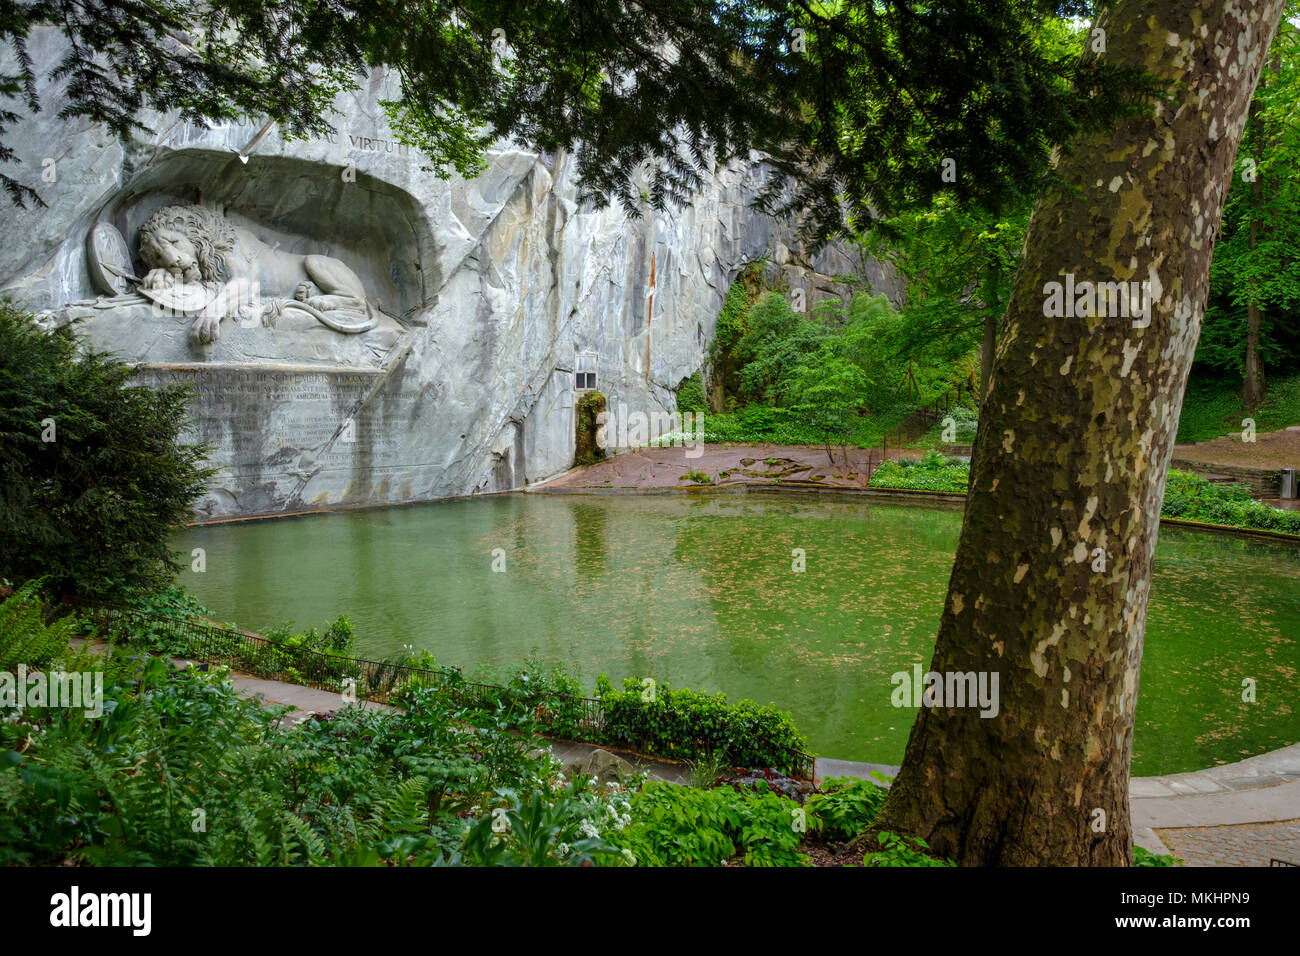 Dying Lion monument in Lucerne, Switzerland, Europe Stock Photo